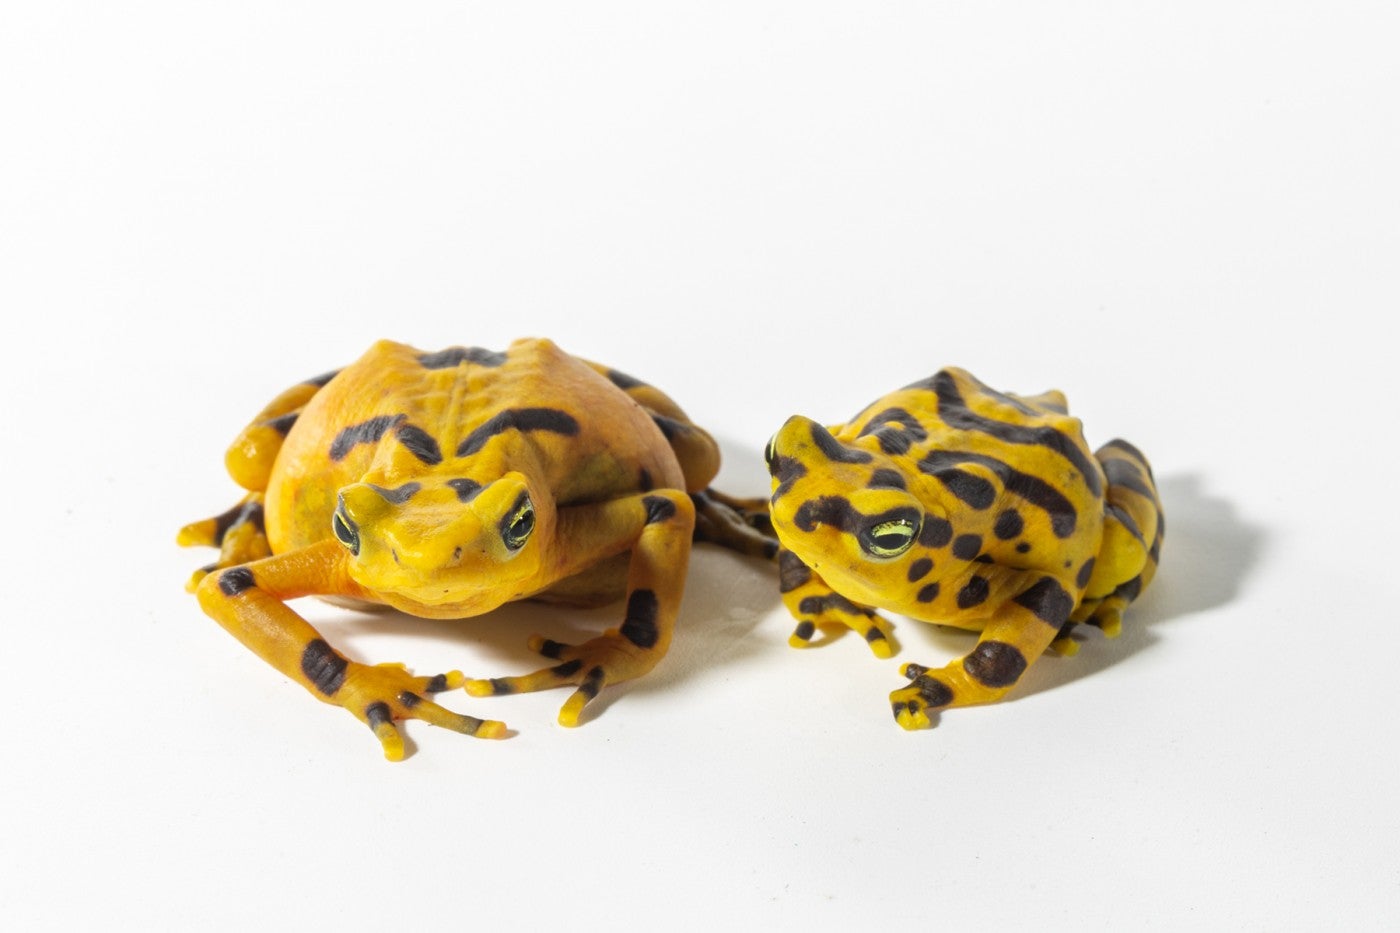 Proud Panamanian golden frog parents. The female is on the left and the male is on her right. He is about half her size. 